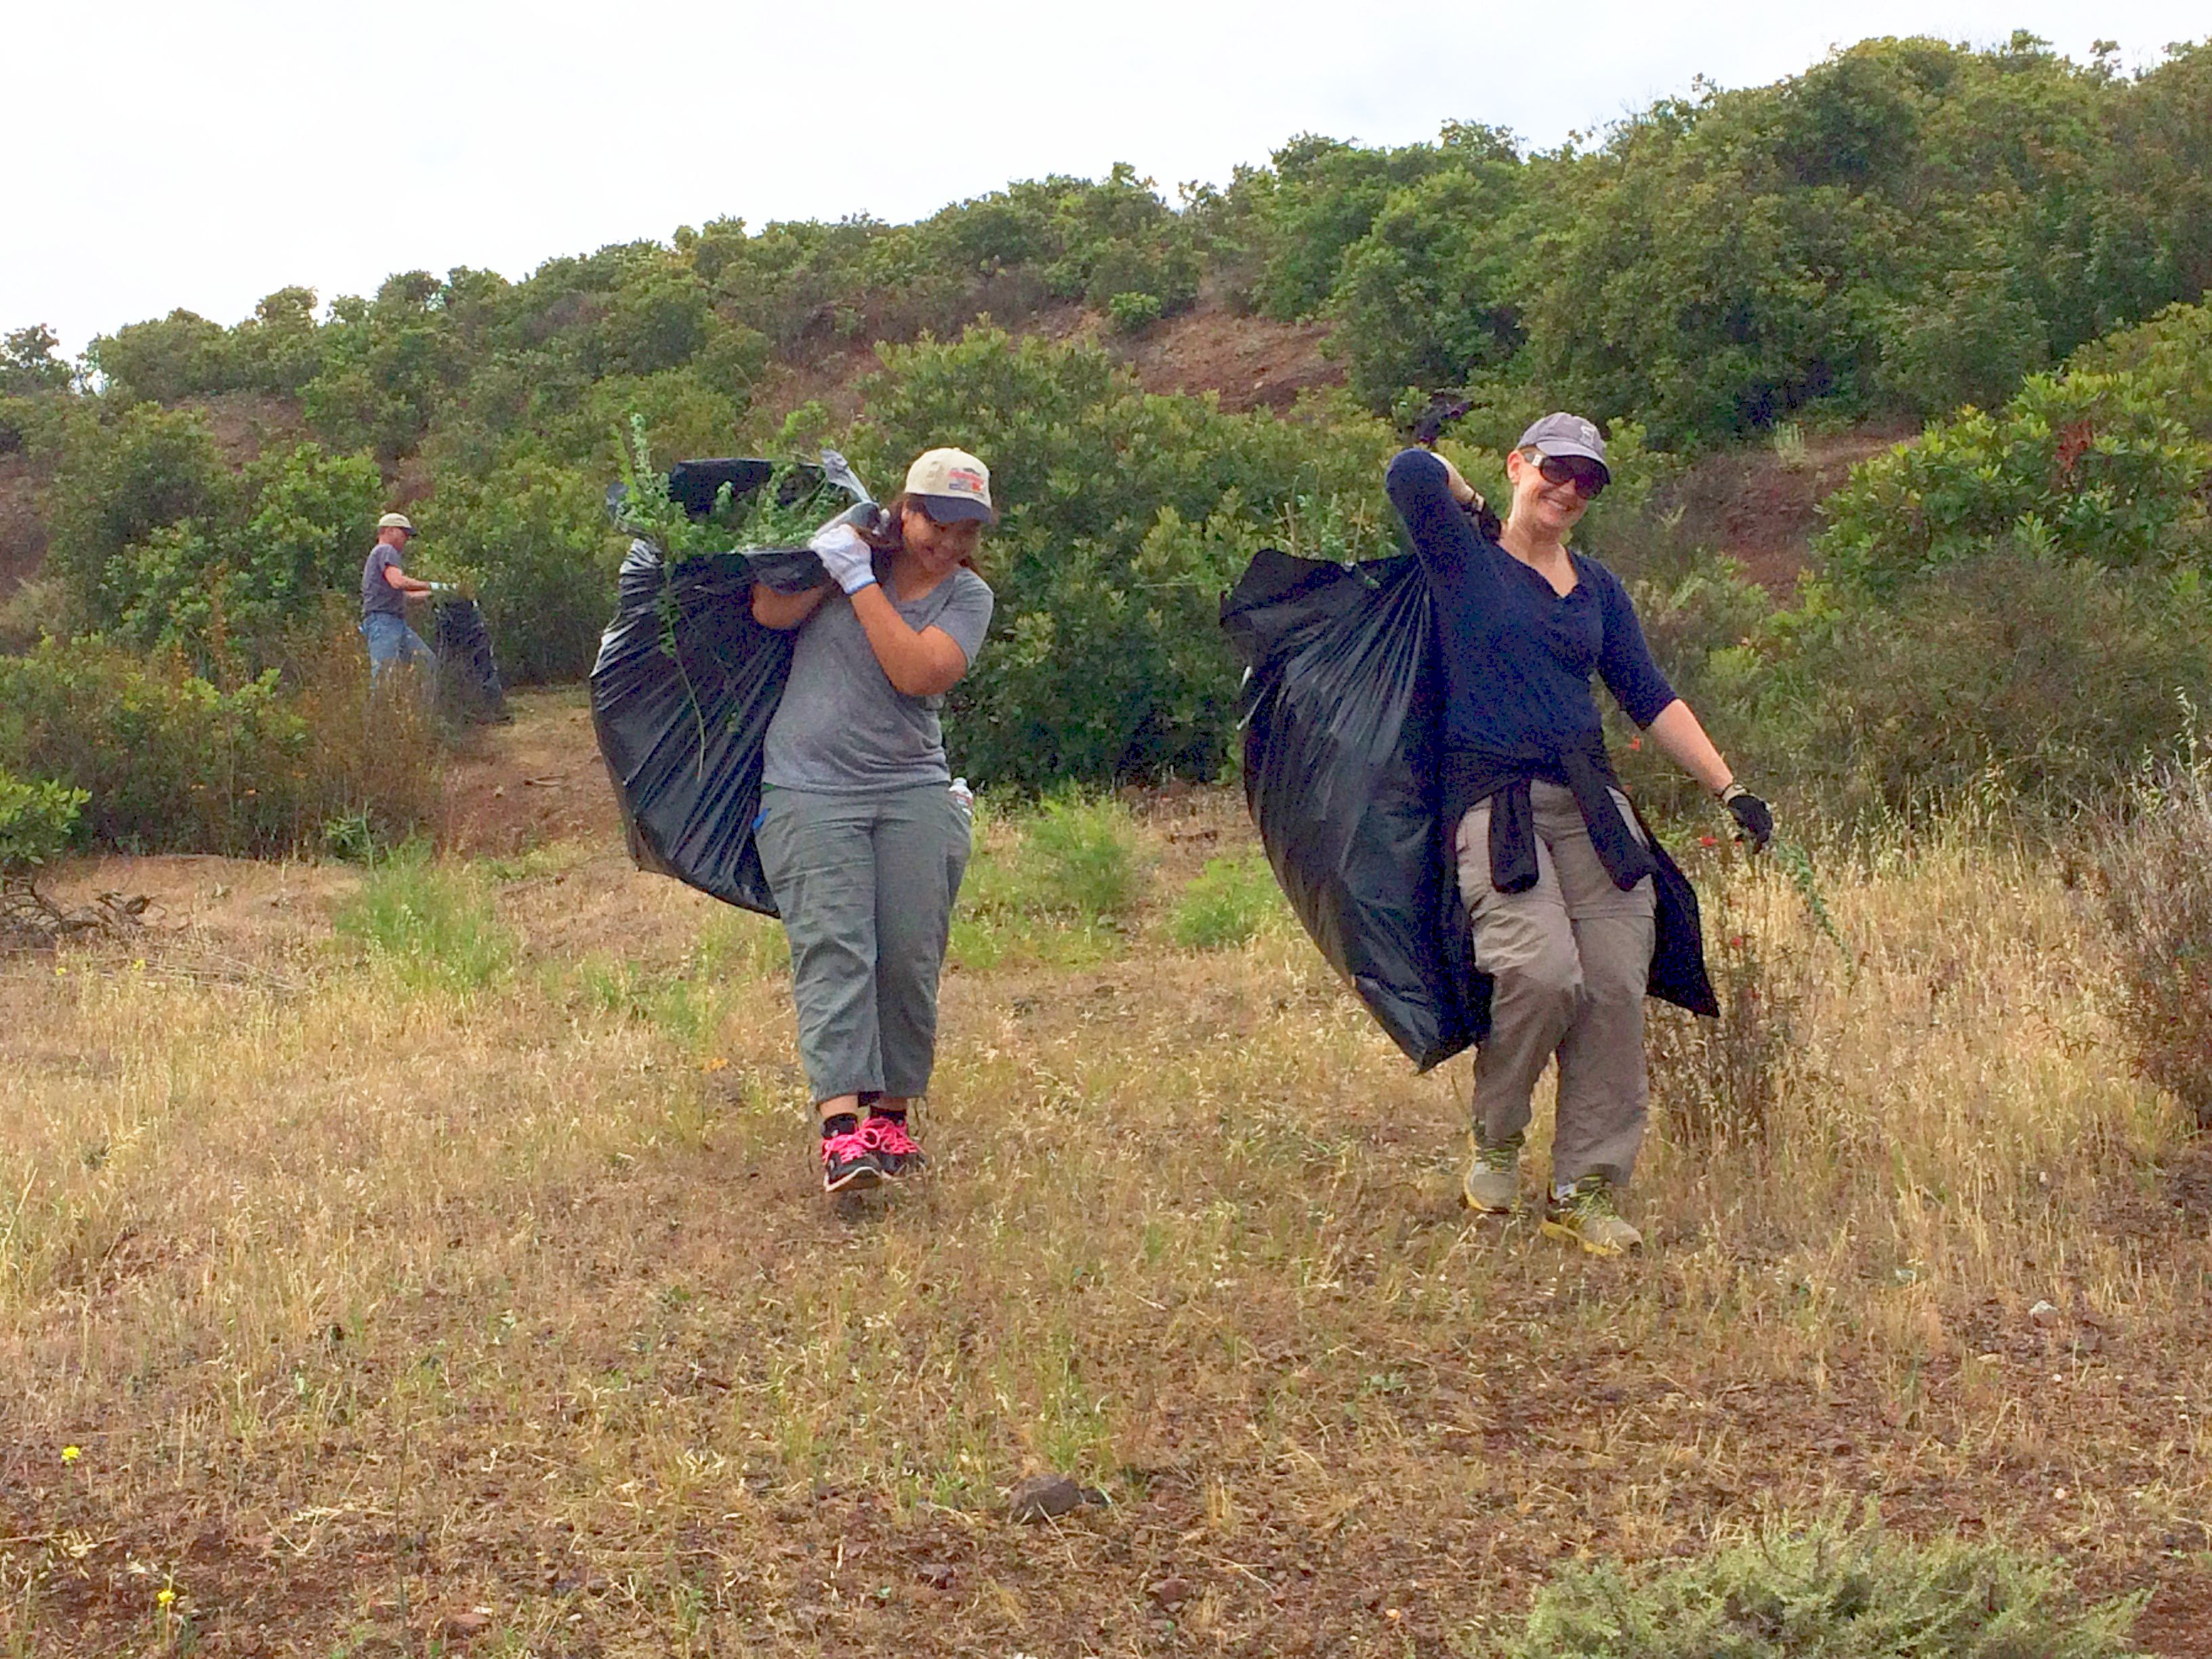 Two women co-workers at OMRON Scientific Technologies haul off invasive French broom from Don Edwards San Francisco Bay Refuge.